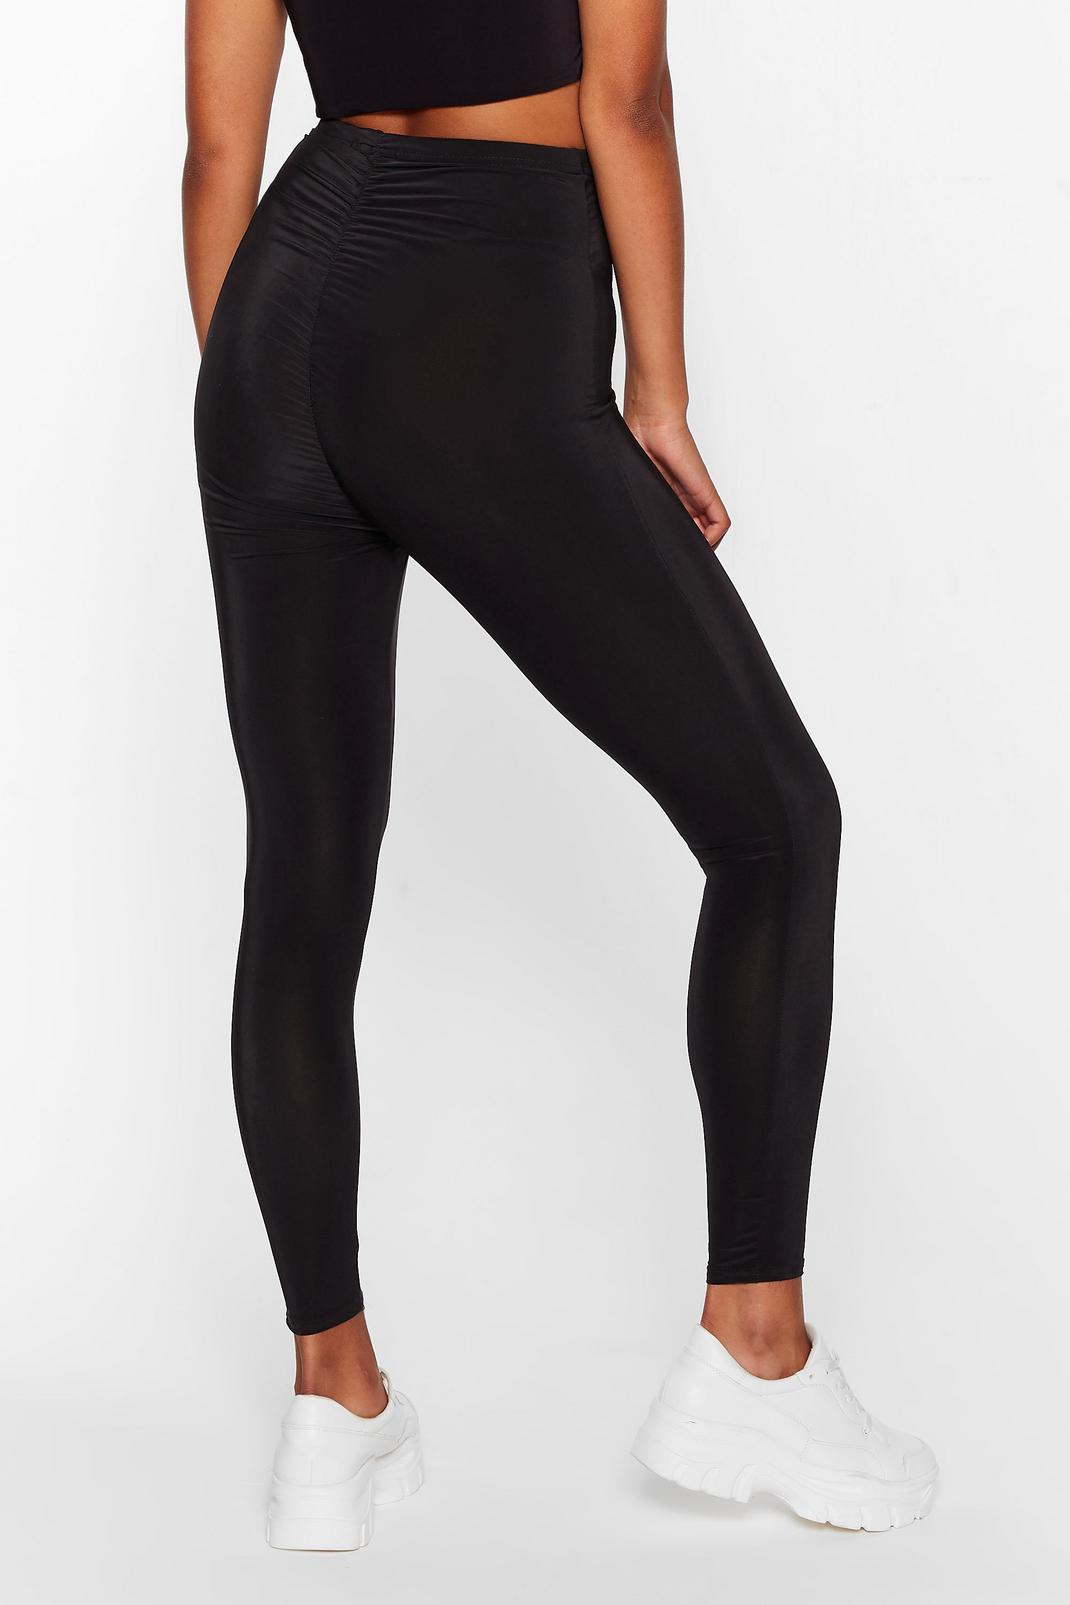 One More Time Ruched Workout Leggings image number 1